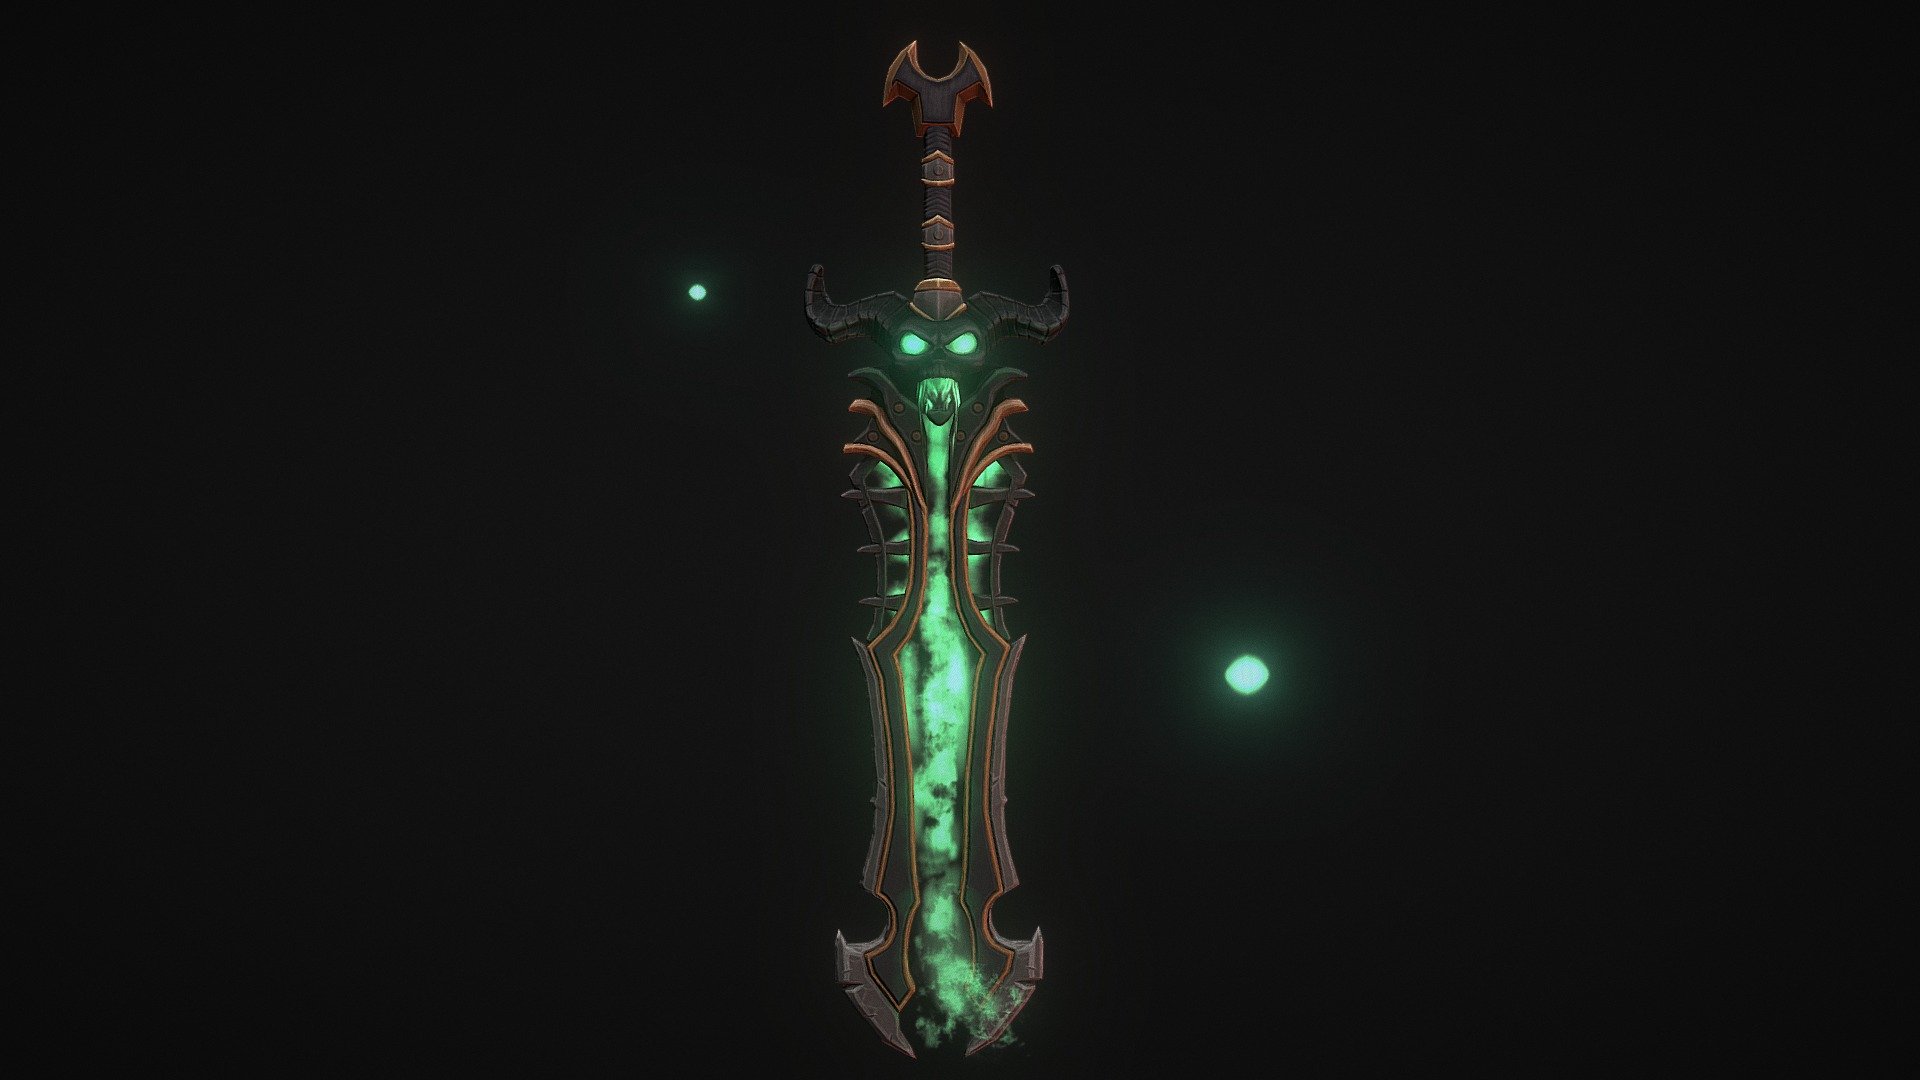 Concept by Ryan Metcalf: https://www.artstation.com/artwork/K0aW4

This is number 1 of 4 swords created in 3D based on Ryan's concept art. For one of my final modules in University I am creating 4 new portfolio pieces where I want to focus on asset creation without creating the concept art myself to see how they turn out.

I created the base model in Maya, took that into ZBrush to soften the edges and add in more detail, lastly I took it into Substance Painter to texture 3d model